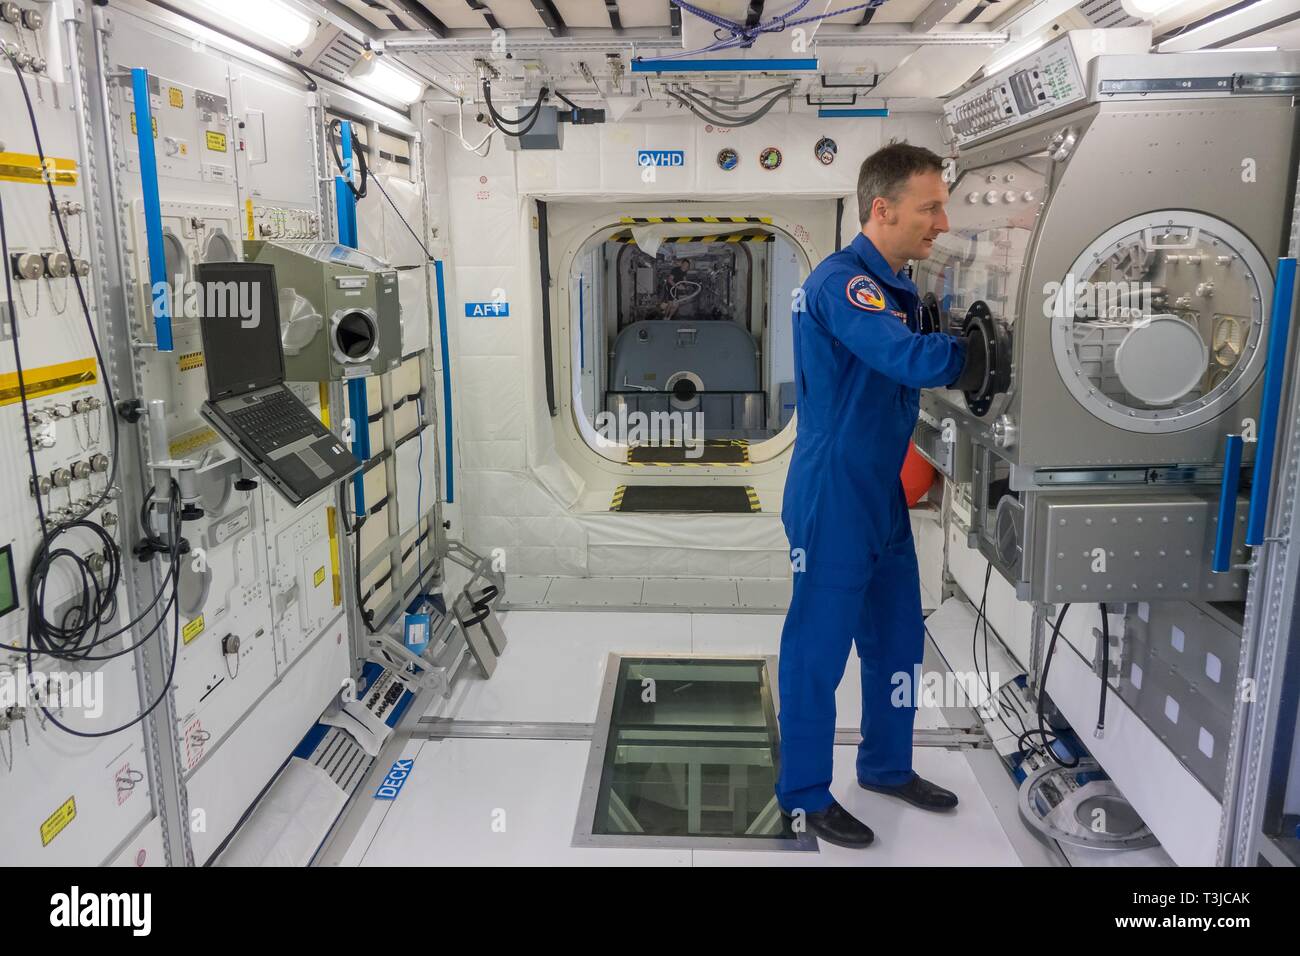 Matthias Maurer, Astronaut, at SpaceShip EAC, Training Center for Astronauts, Cologne, Germany Stock Photo